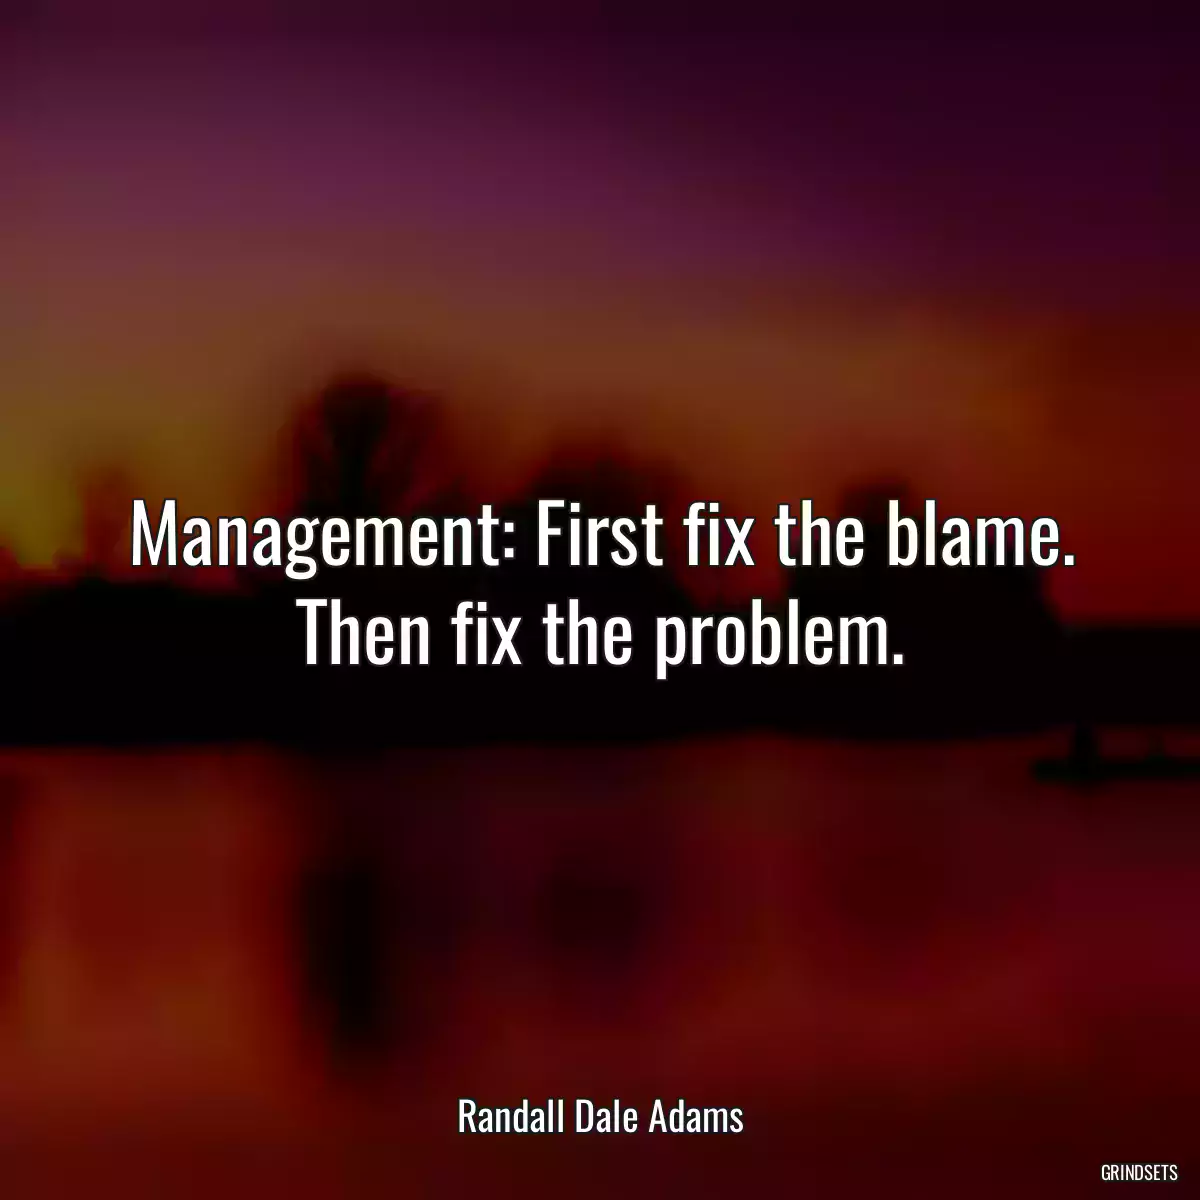 Management: First fix the blame. Then fix the problem.